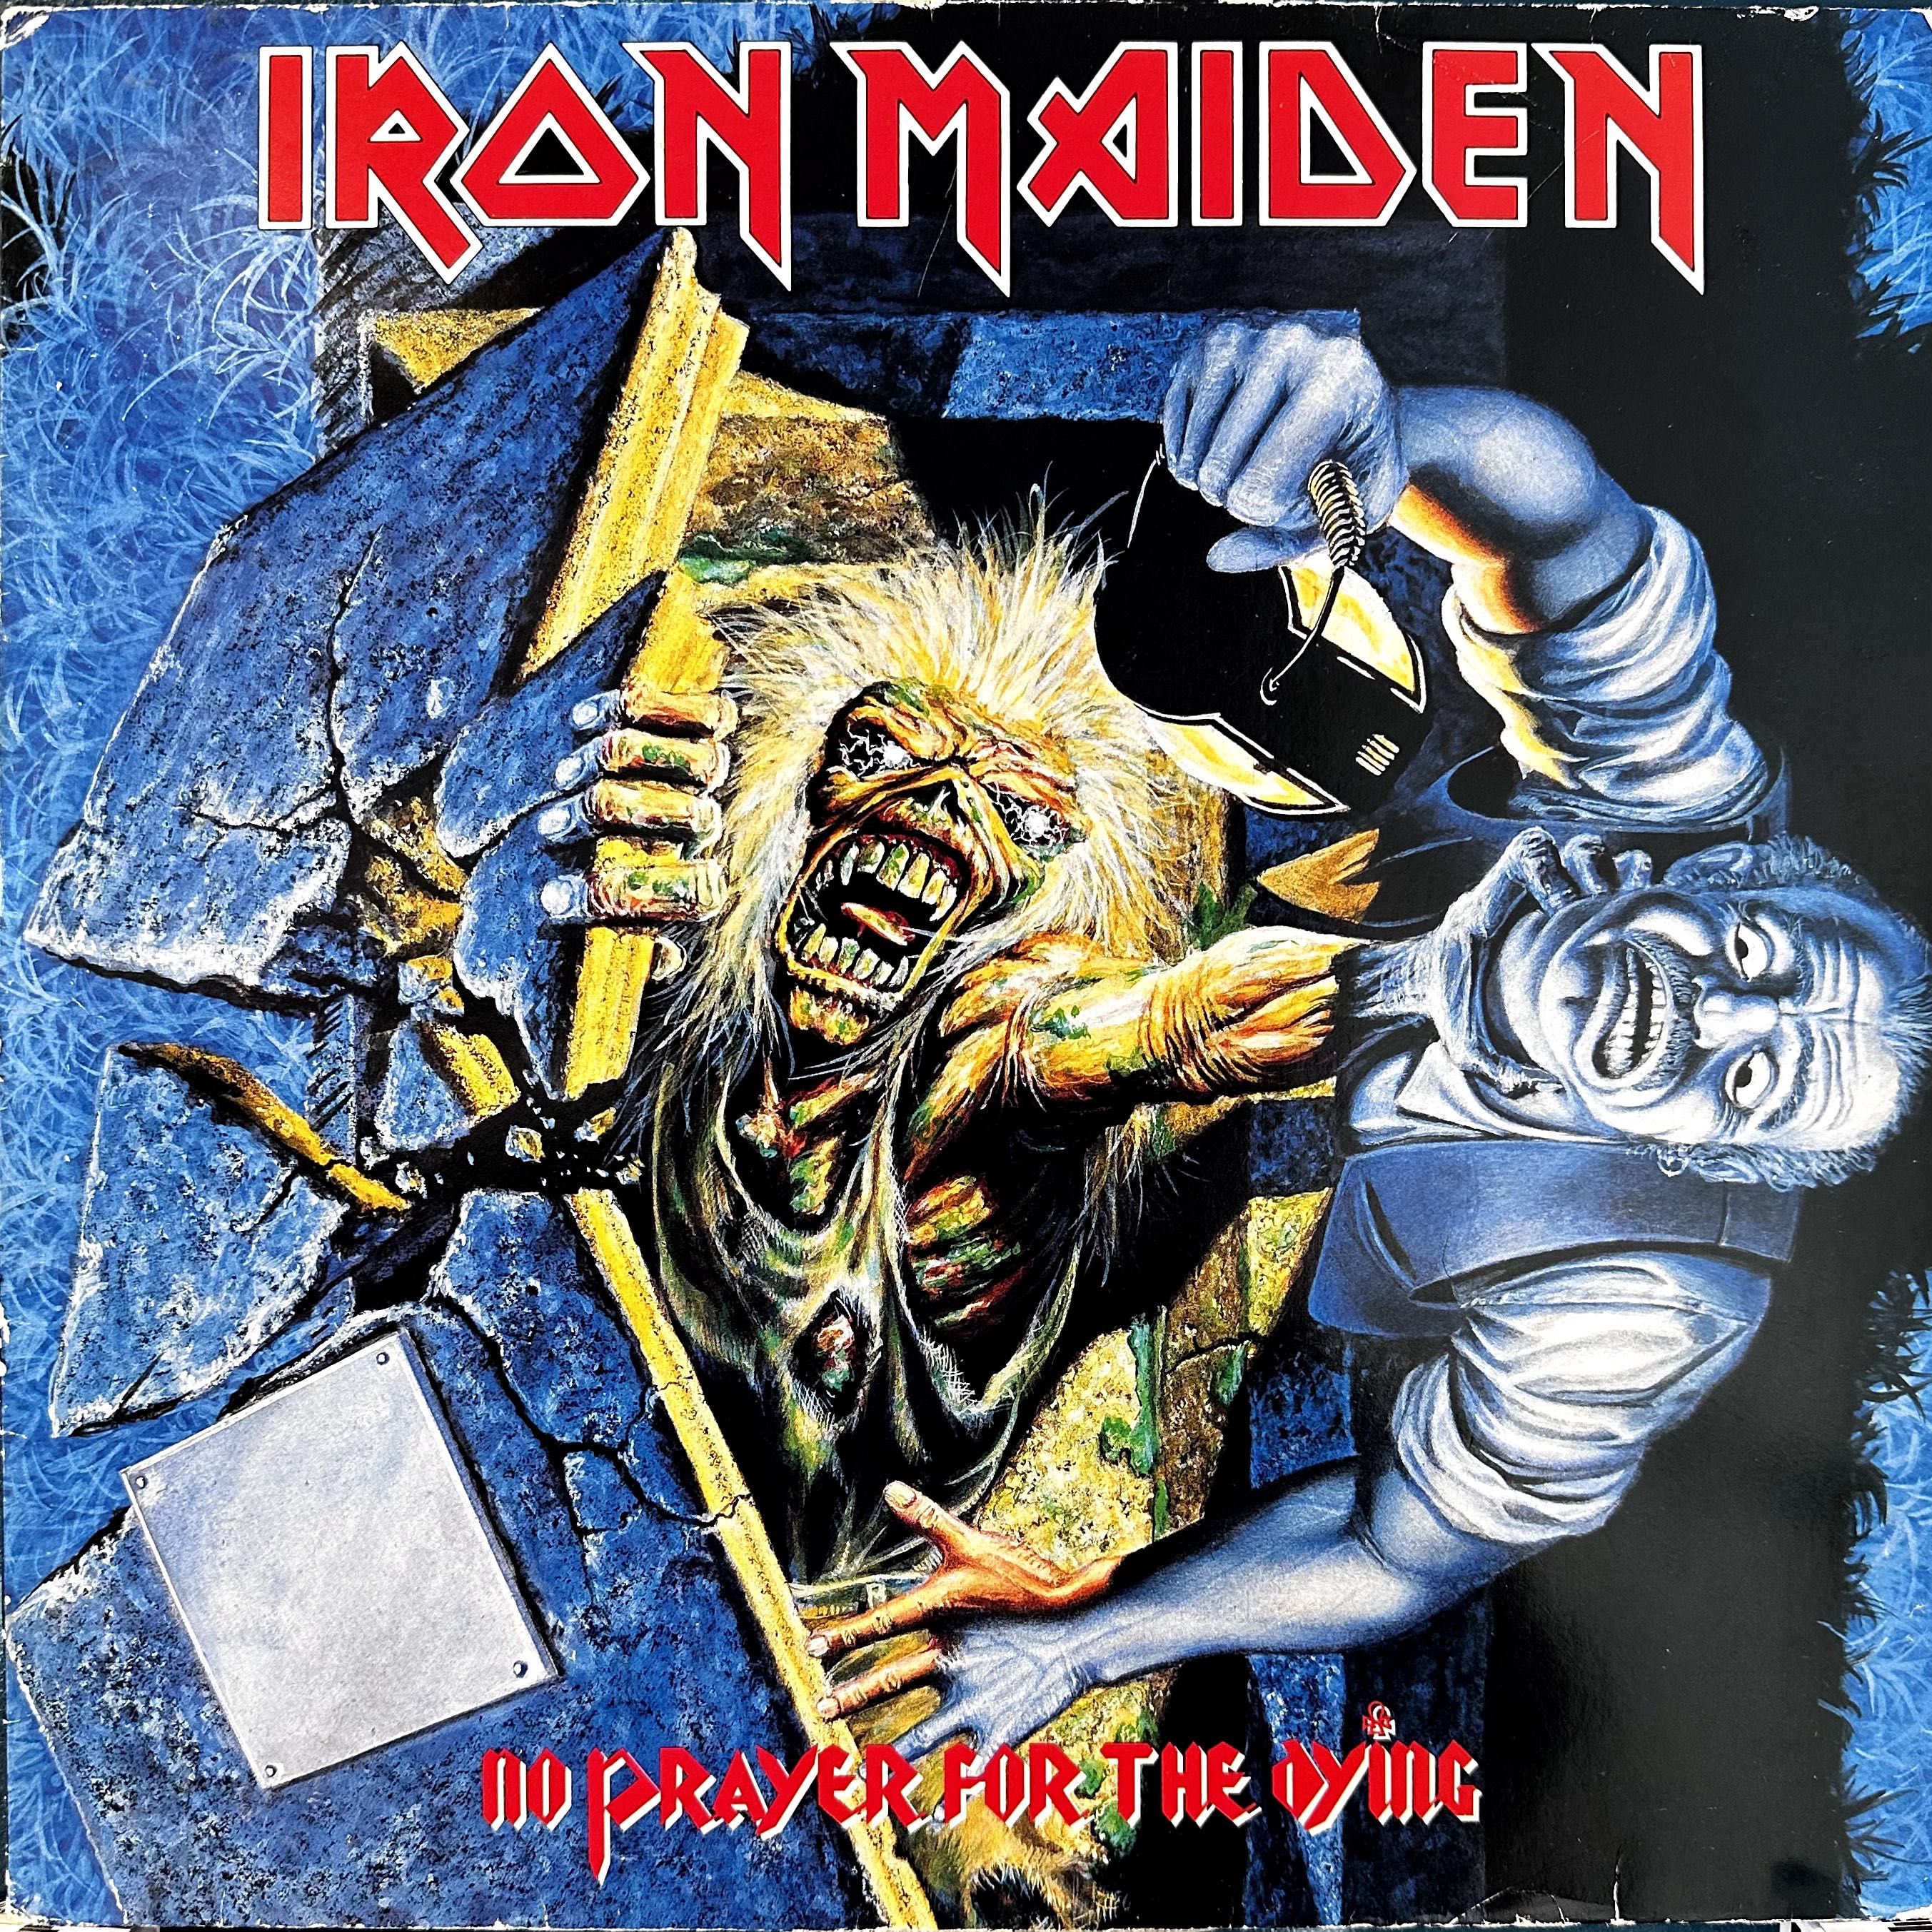 Iron Maiden - No Prayer for the Dying (Vinyl, 1990, Germany)